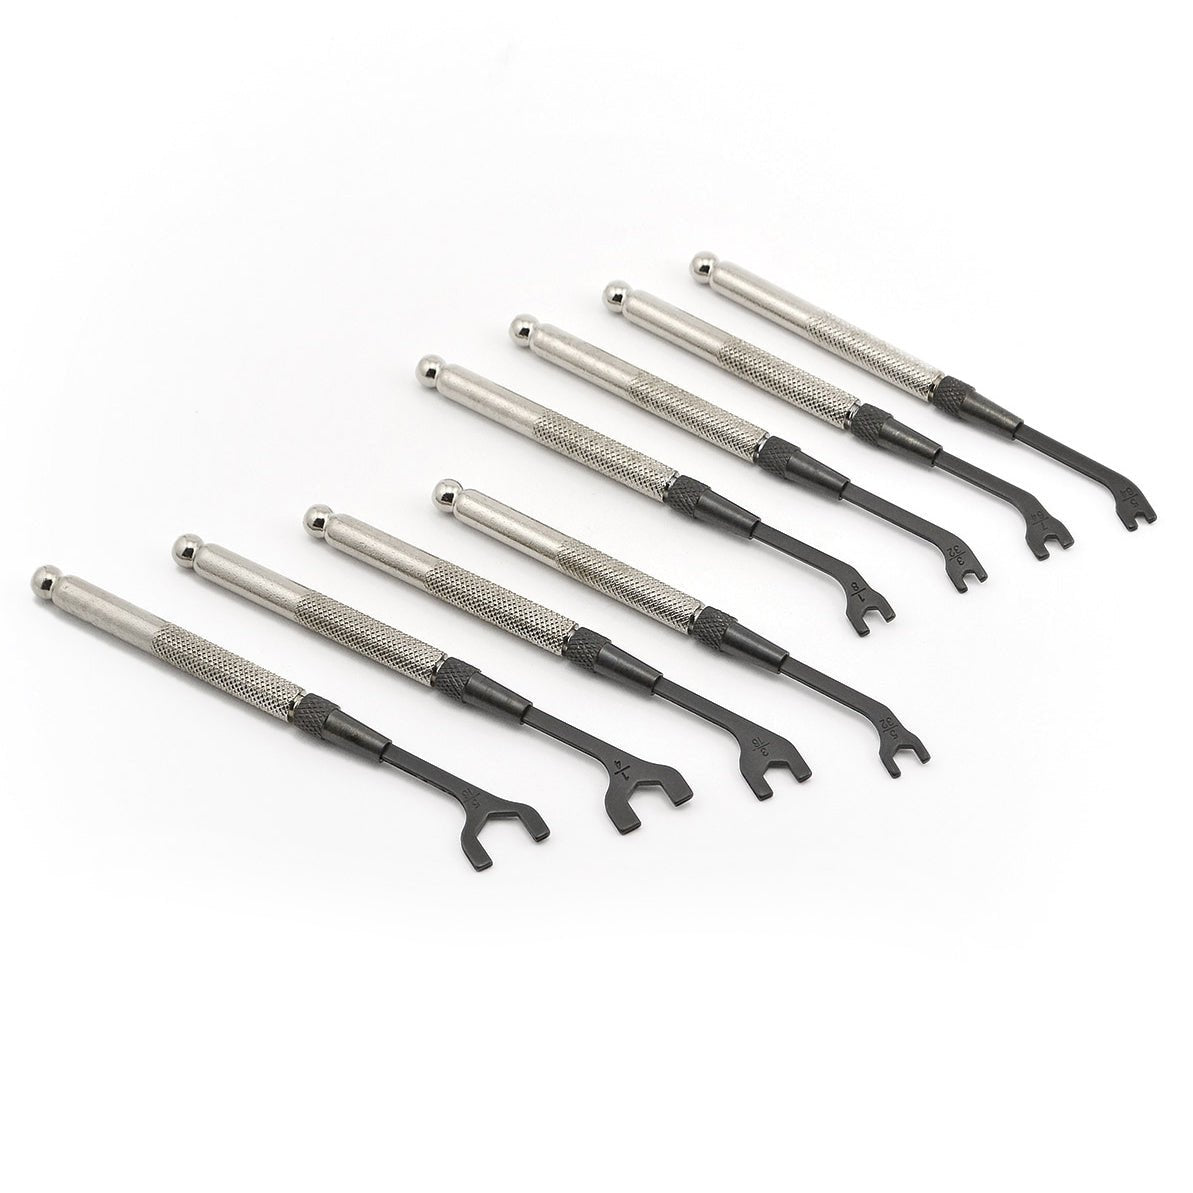 8-piece Open Ended Wrench Inch Set